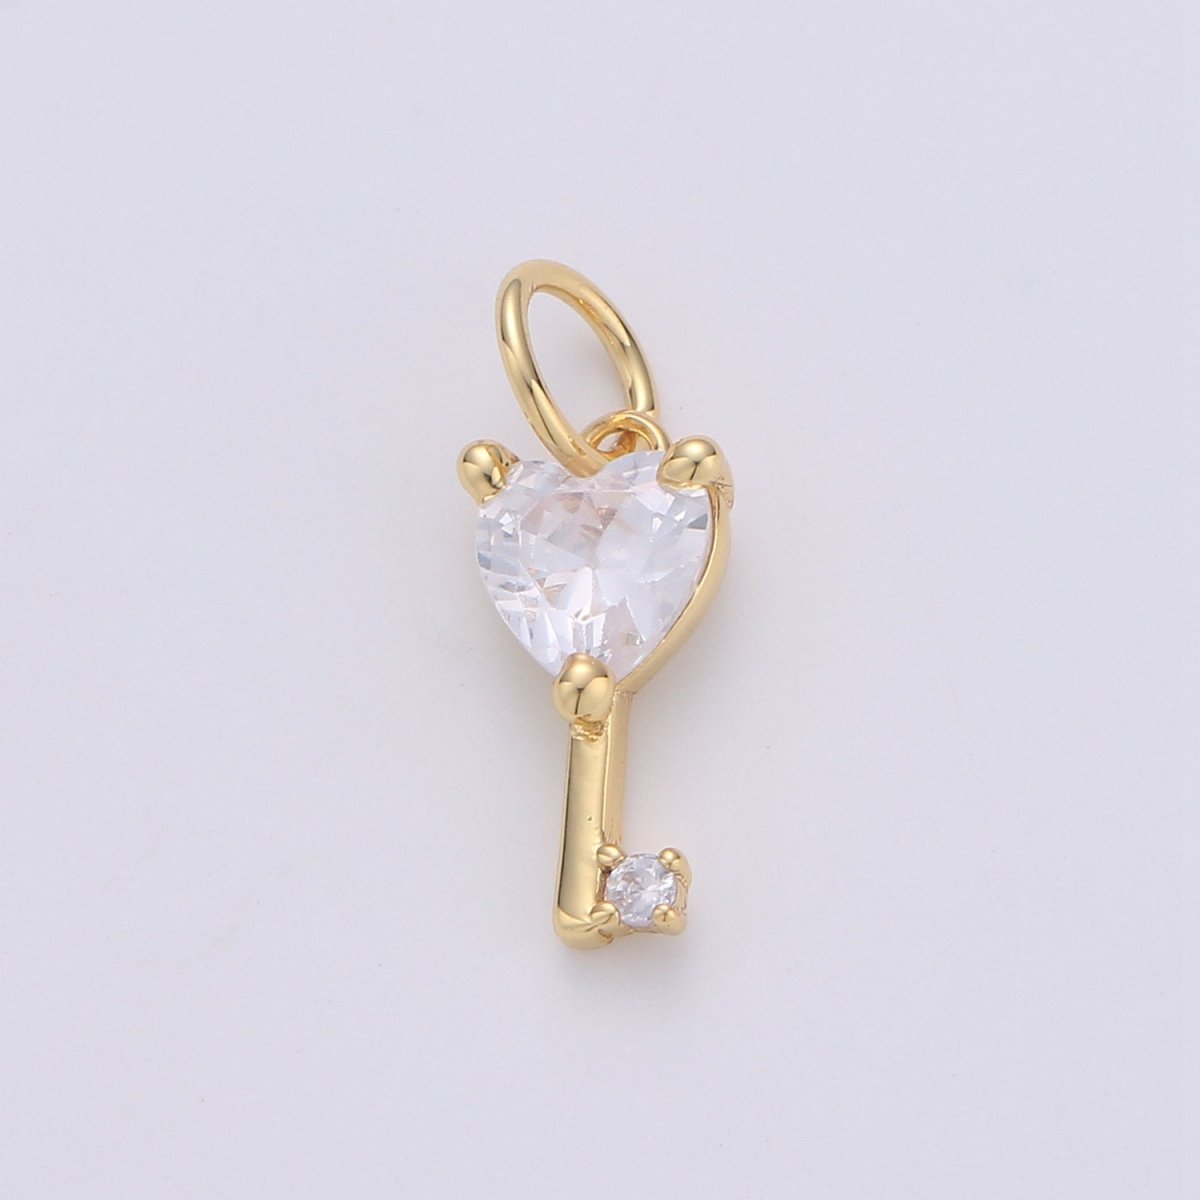 Mini 24k Gold Filled Heart Charms, Gold Filled Love Charm, Cubic Charm ,Gold Love Key charm Relationship Jewelry Inspired D-561 D-562 - DLUXCA